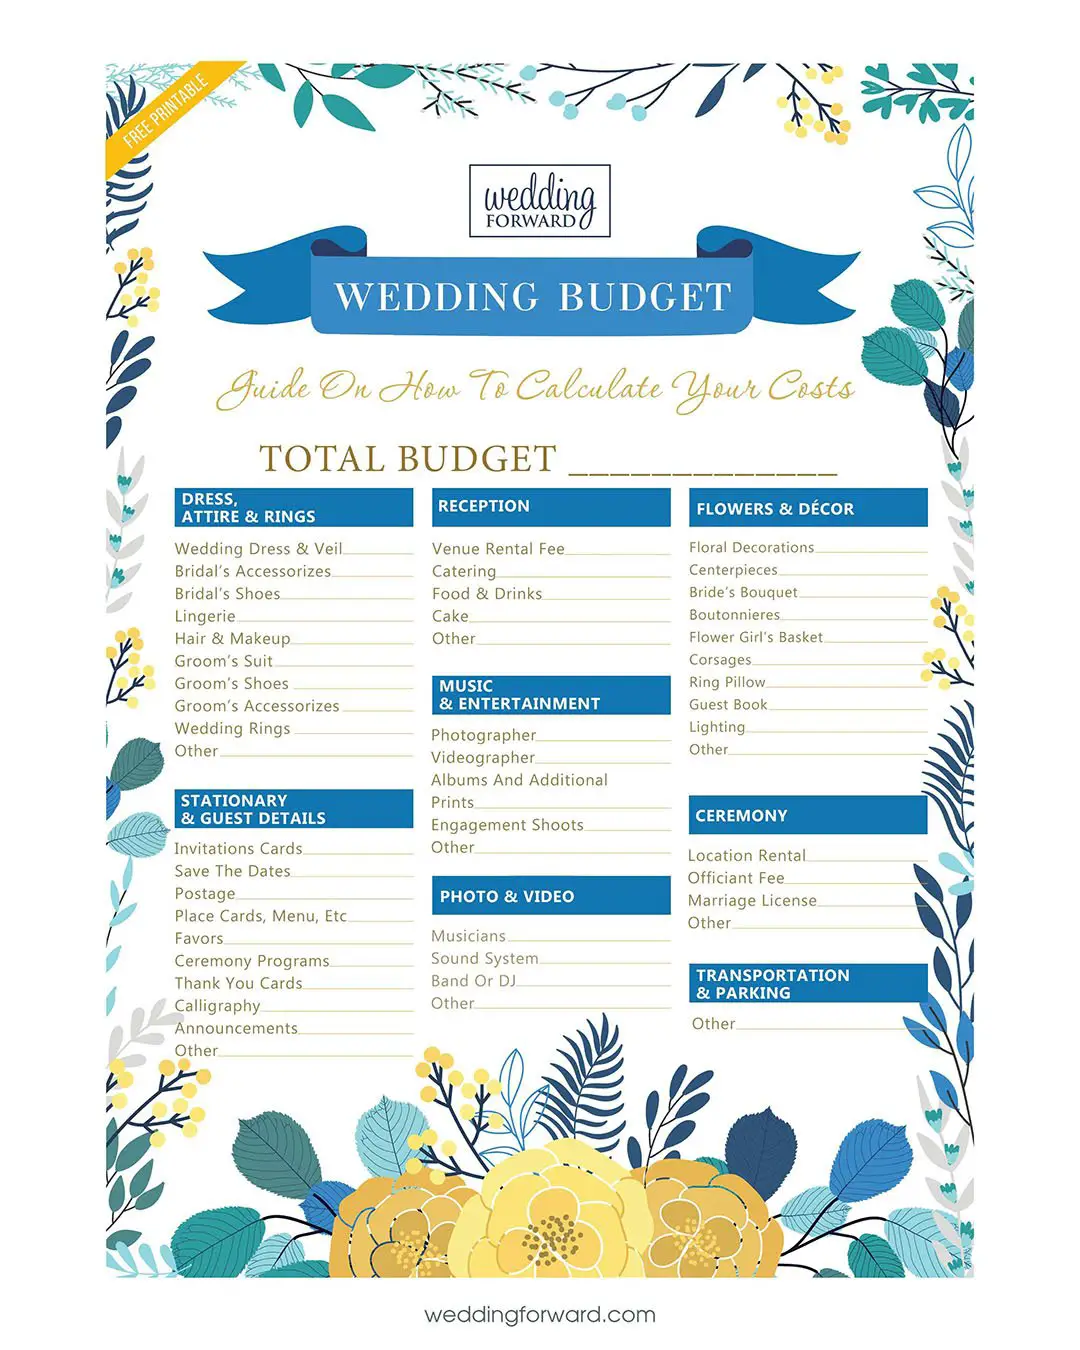 Wedding Budget Breakdown: Ultimate Guide + Free Checklists